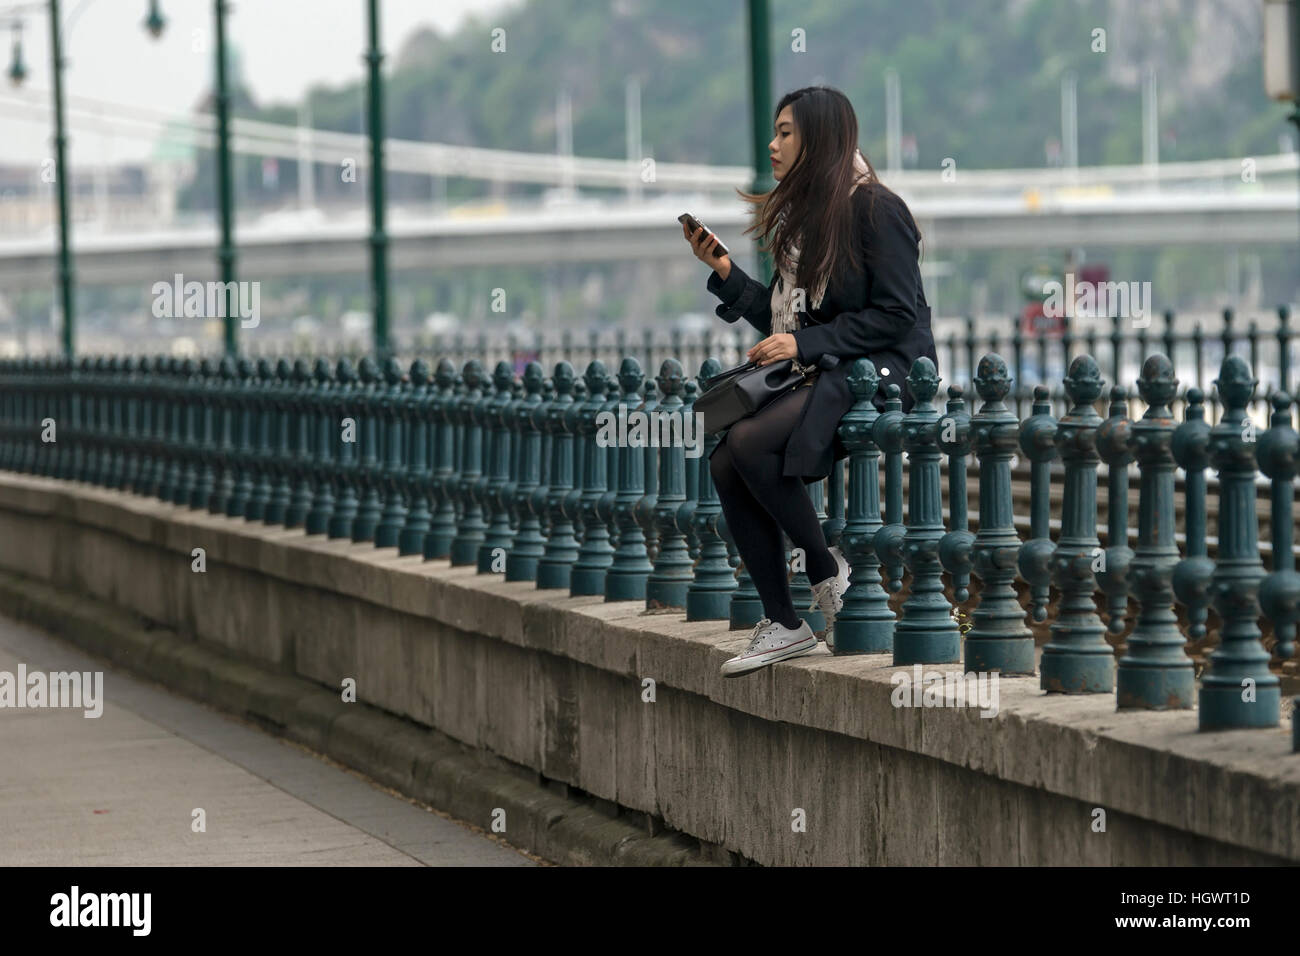 Budapest, Hungary - April 11,2016: A young Chinese girl sitting on the fence and play with mobile phone. Stock Photo